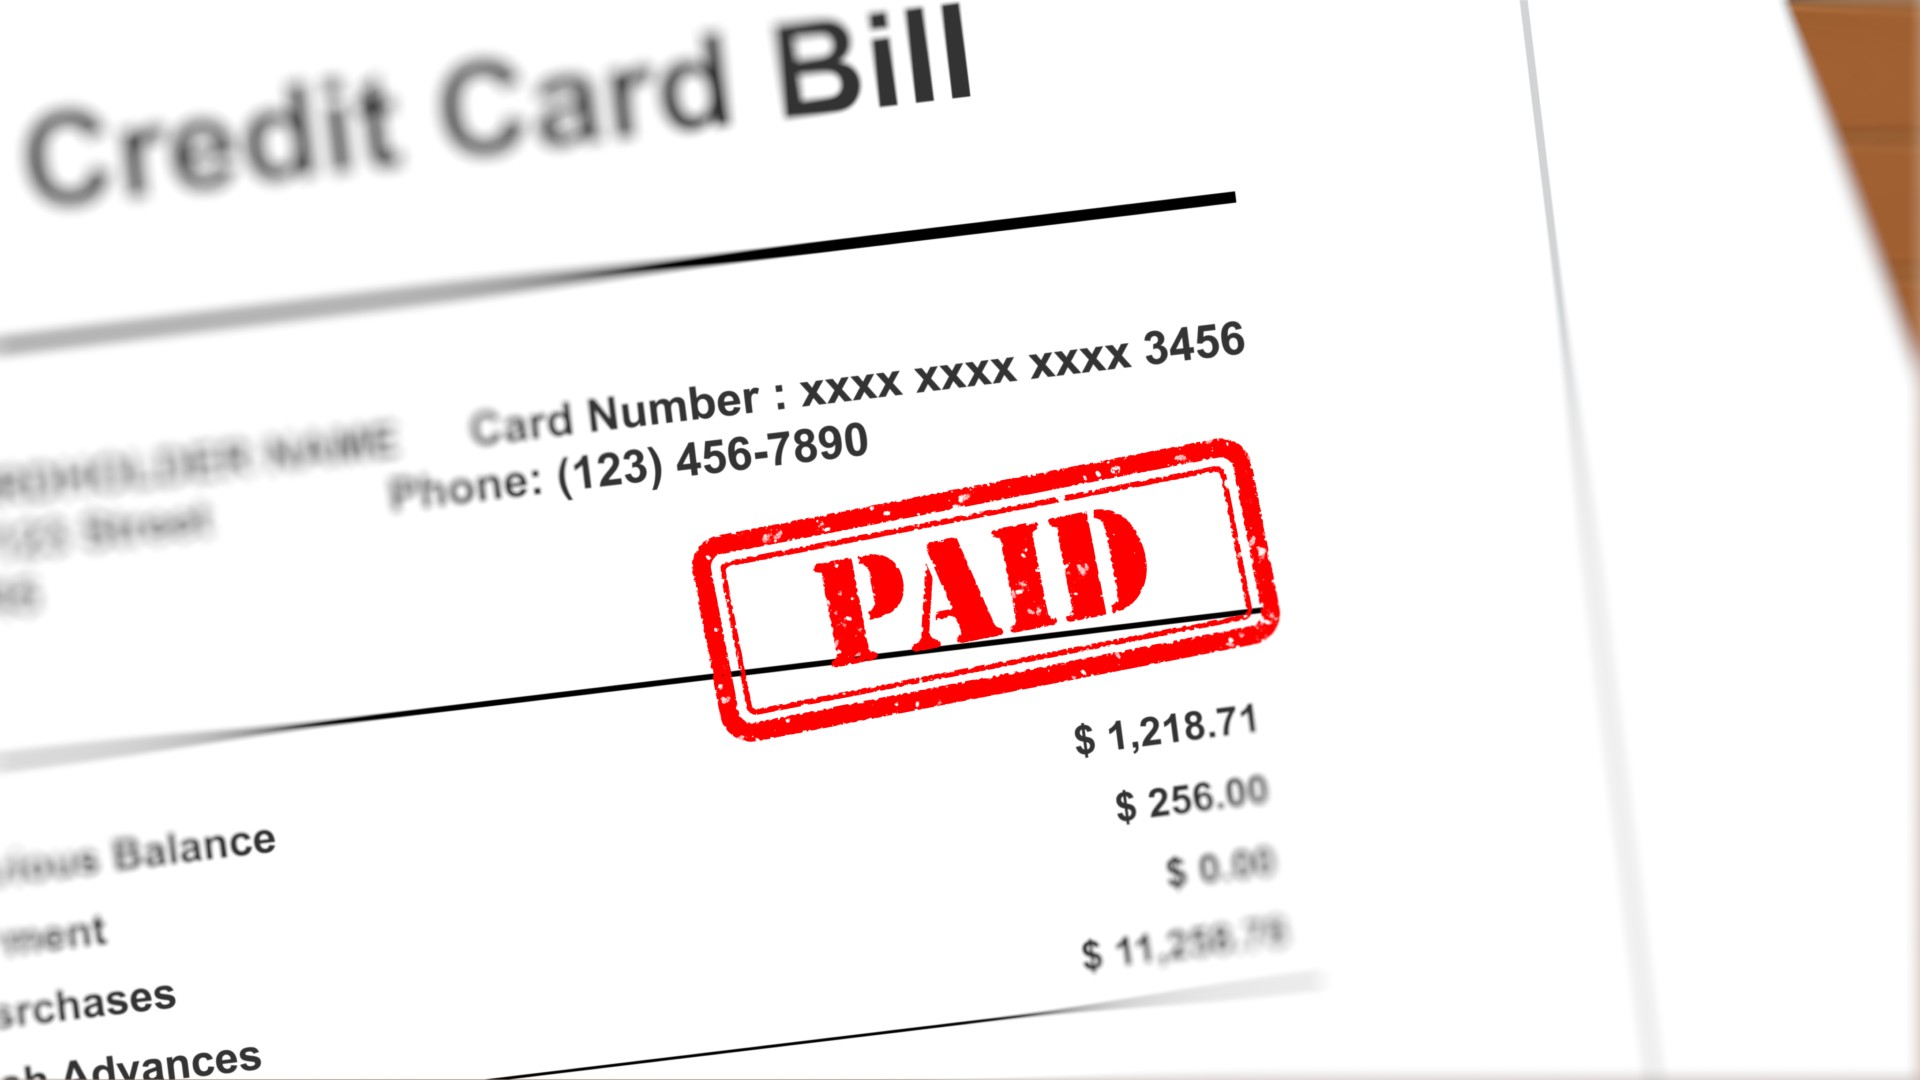 A credit card bill with the word “paid stamped over it shows how our Texas bankruptcy lawyers can help